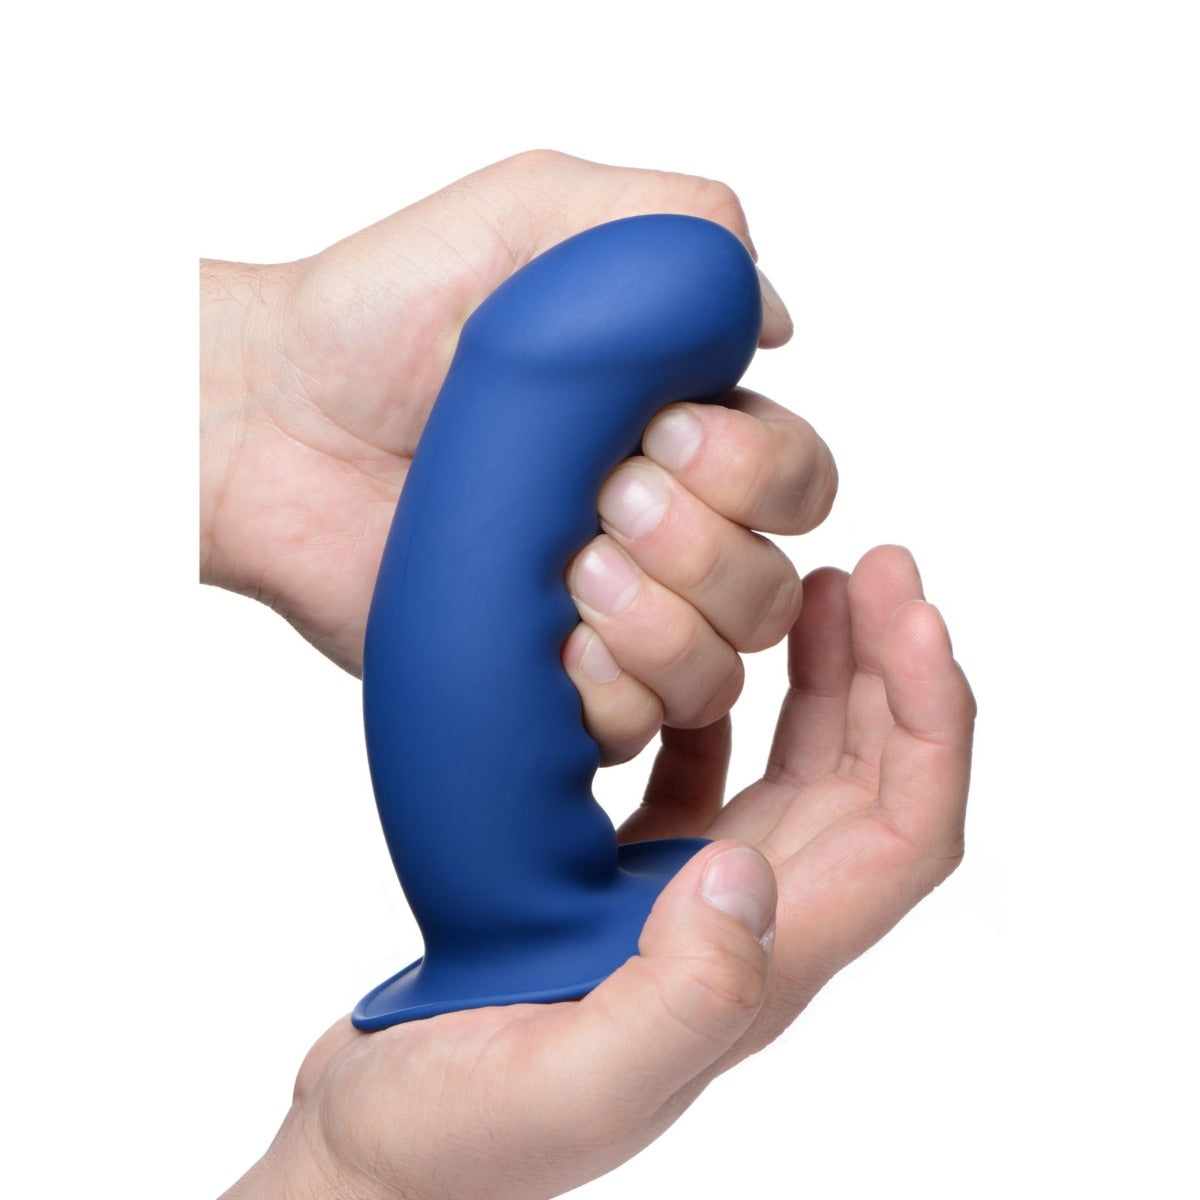 Squeeze-It Squeezable Thick Phallic Dildo Blue 6.5 Inch